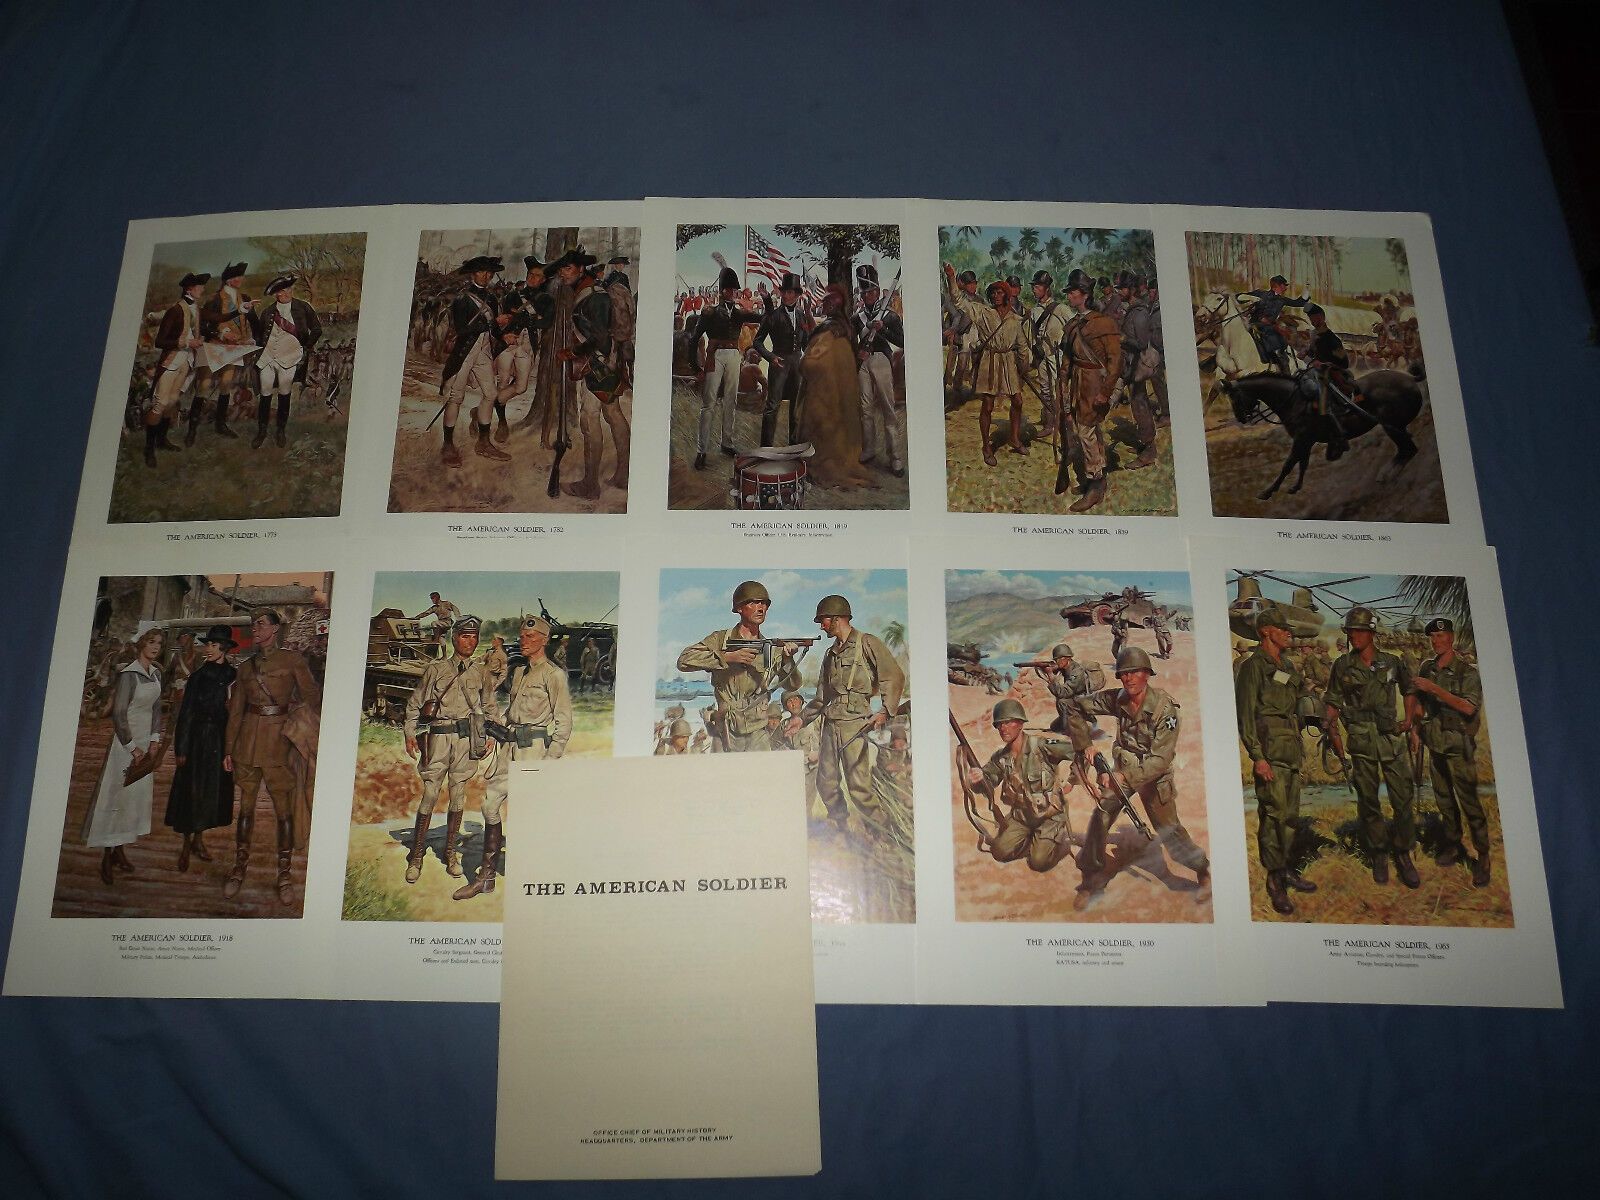 VINTAGE 1960S DEPT OF ARMY 10 COLOR PRINTS THE AMERICAN SOLDIER SET 3